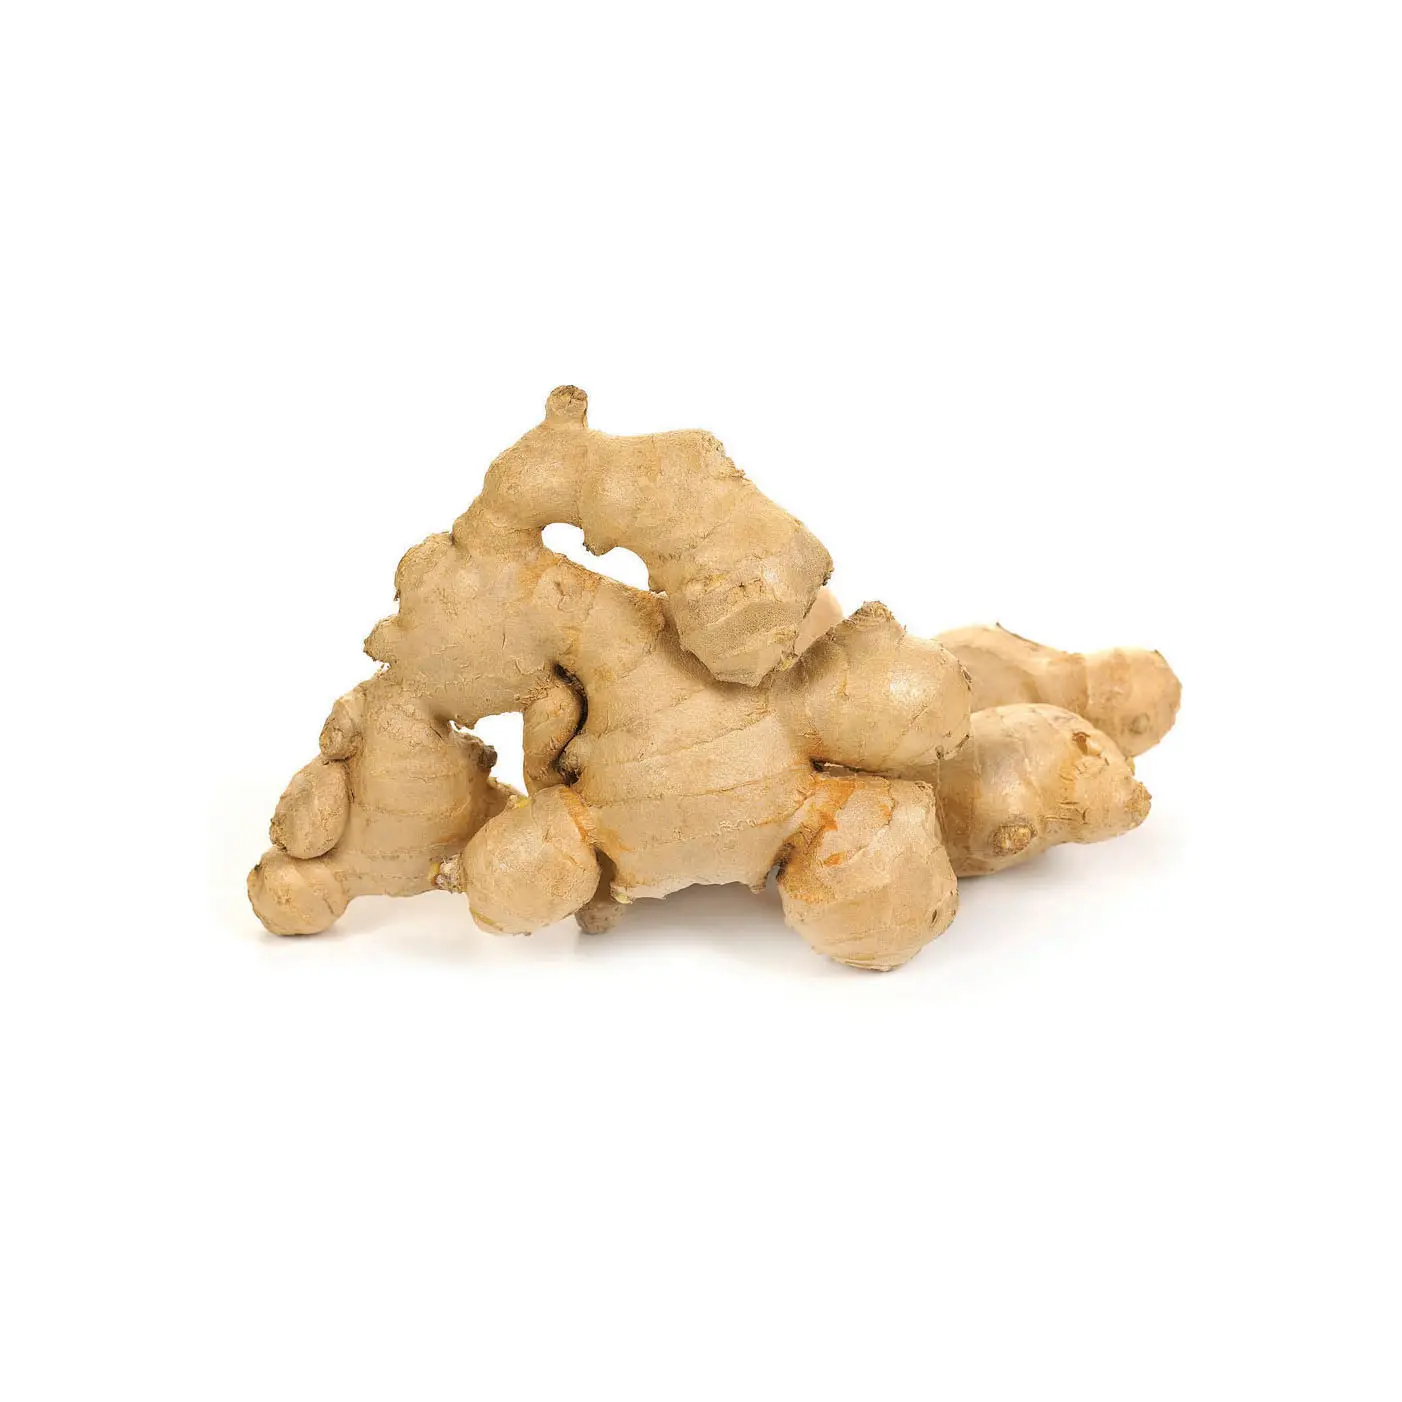 New Crop Fresh Ginger For Sale - Ginger Root Superior Quality from Brazil - Spicy and Fragrant Flavor - Ginger Exporters